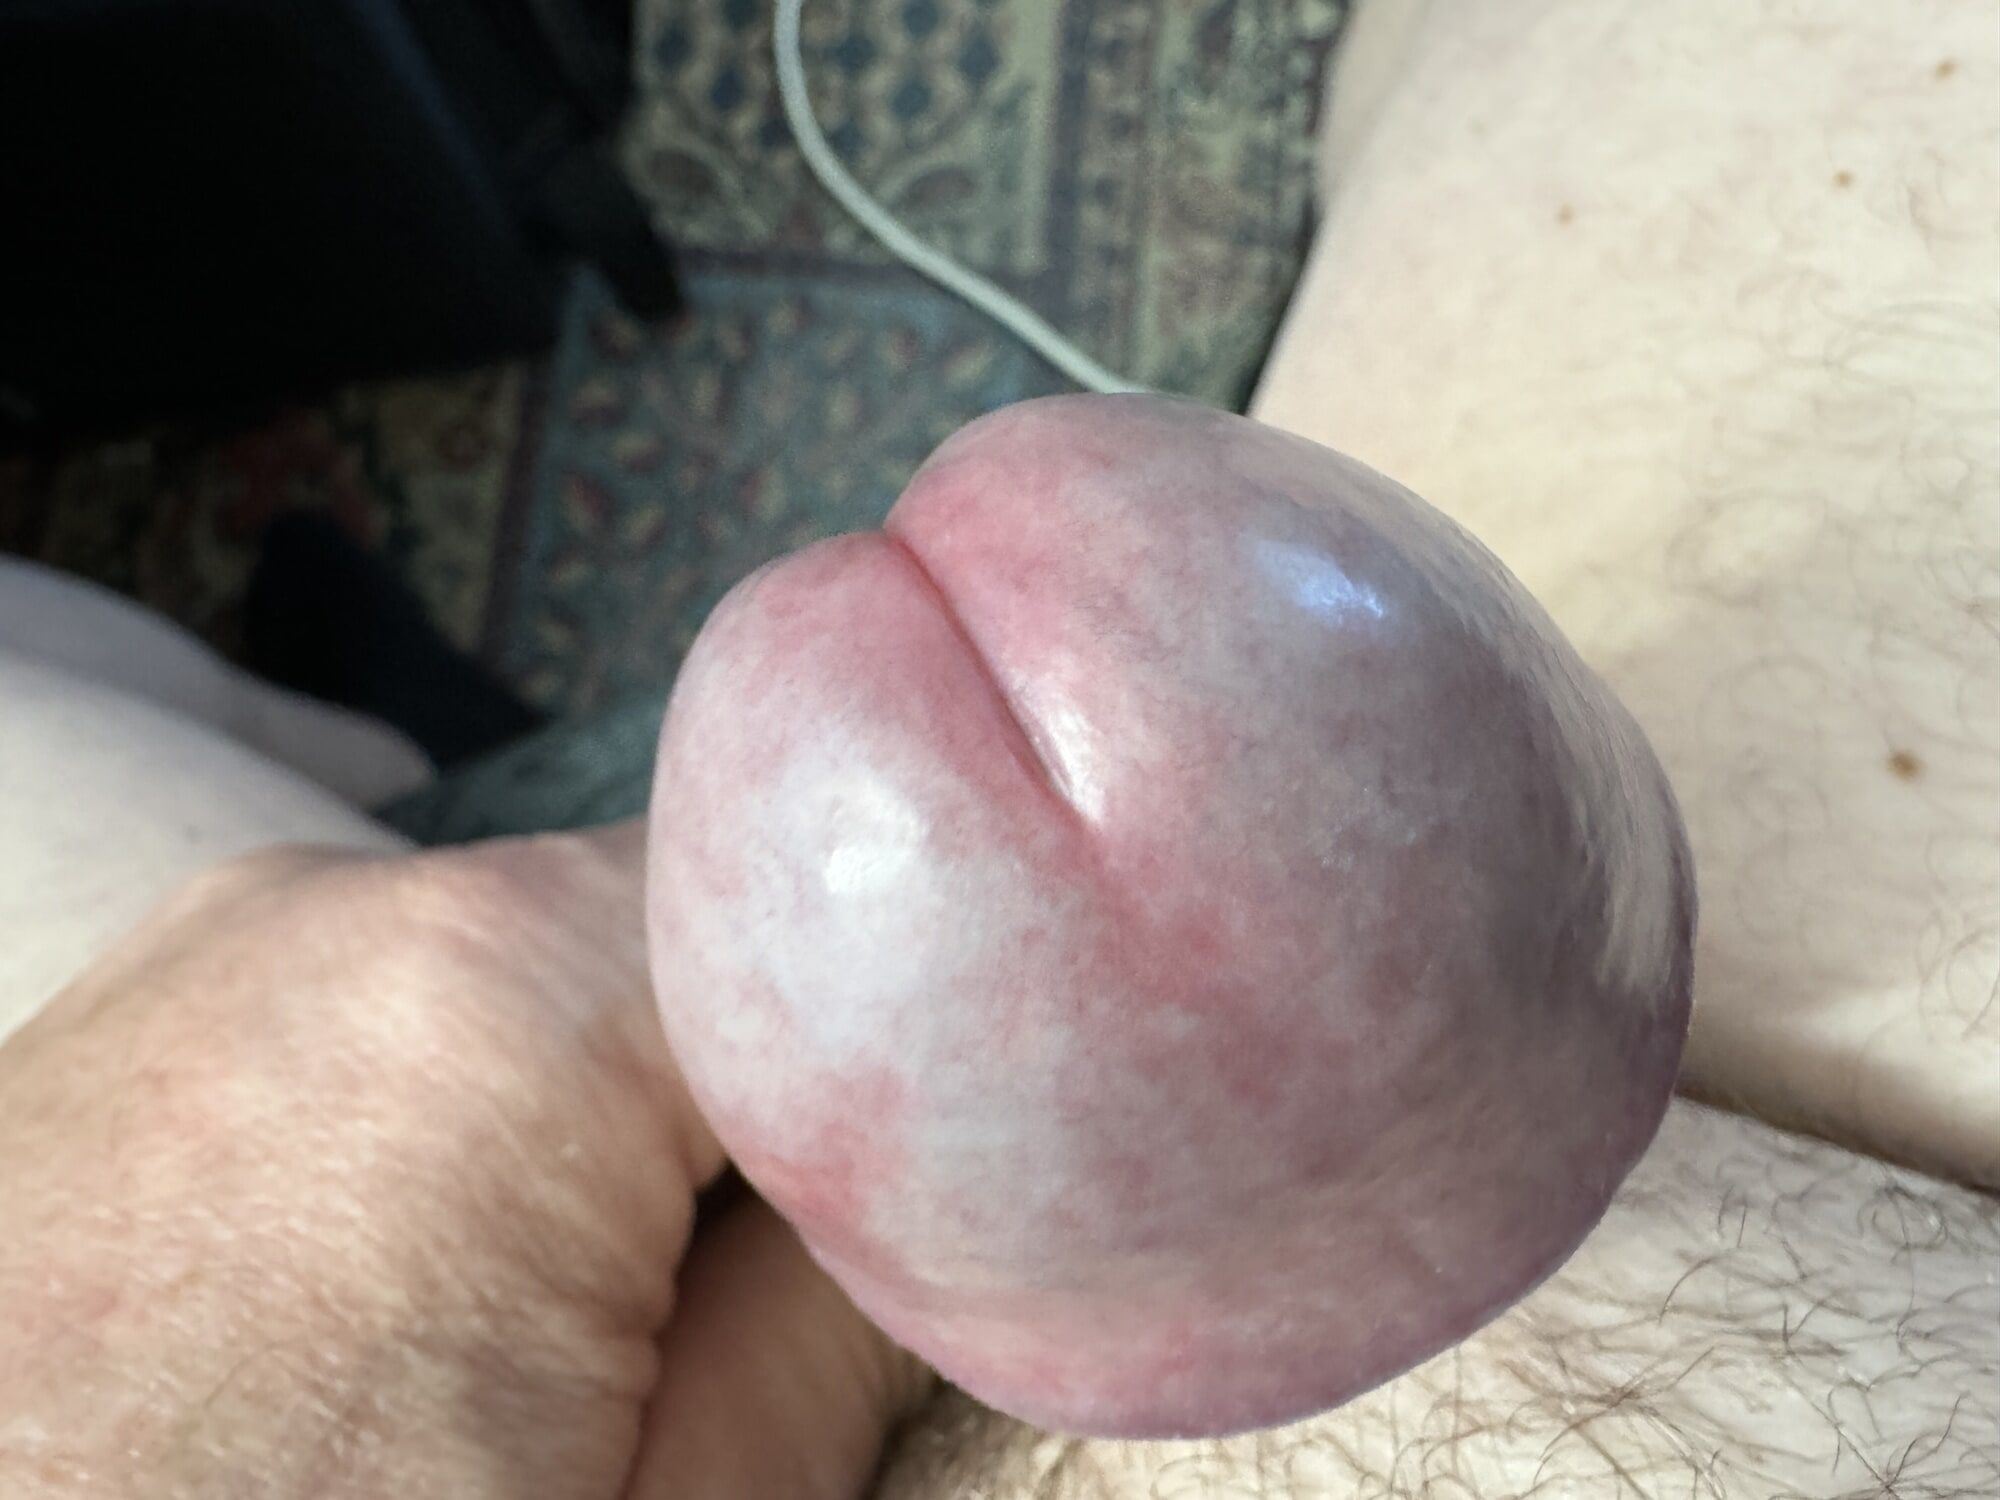 My hot cock